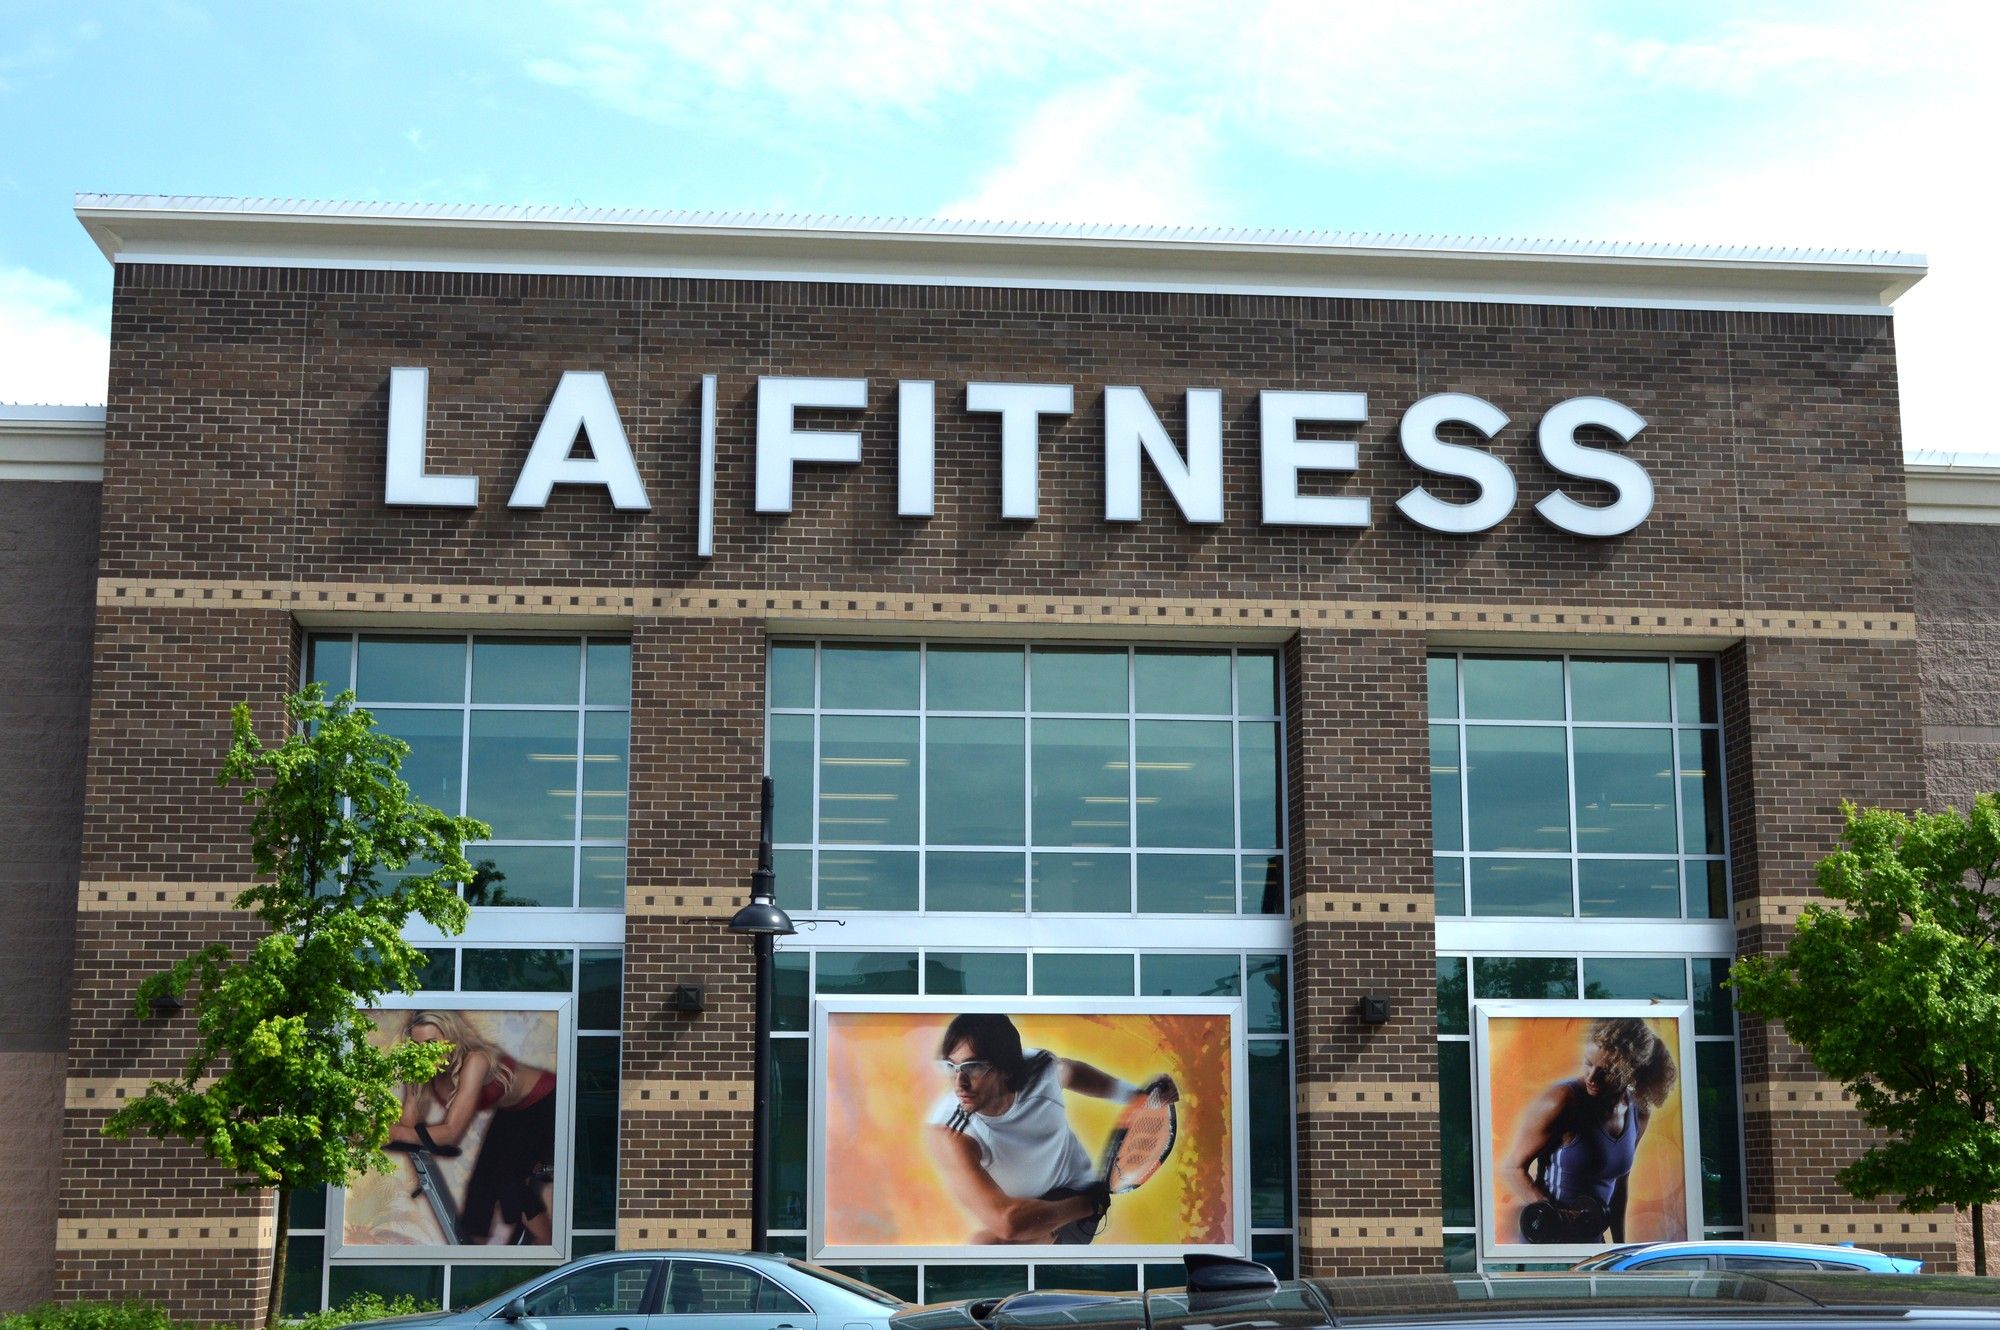 la-fitness-unlawfully-enriched-by-membership-fees-during-covid-19-says